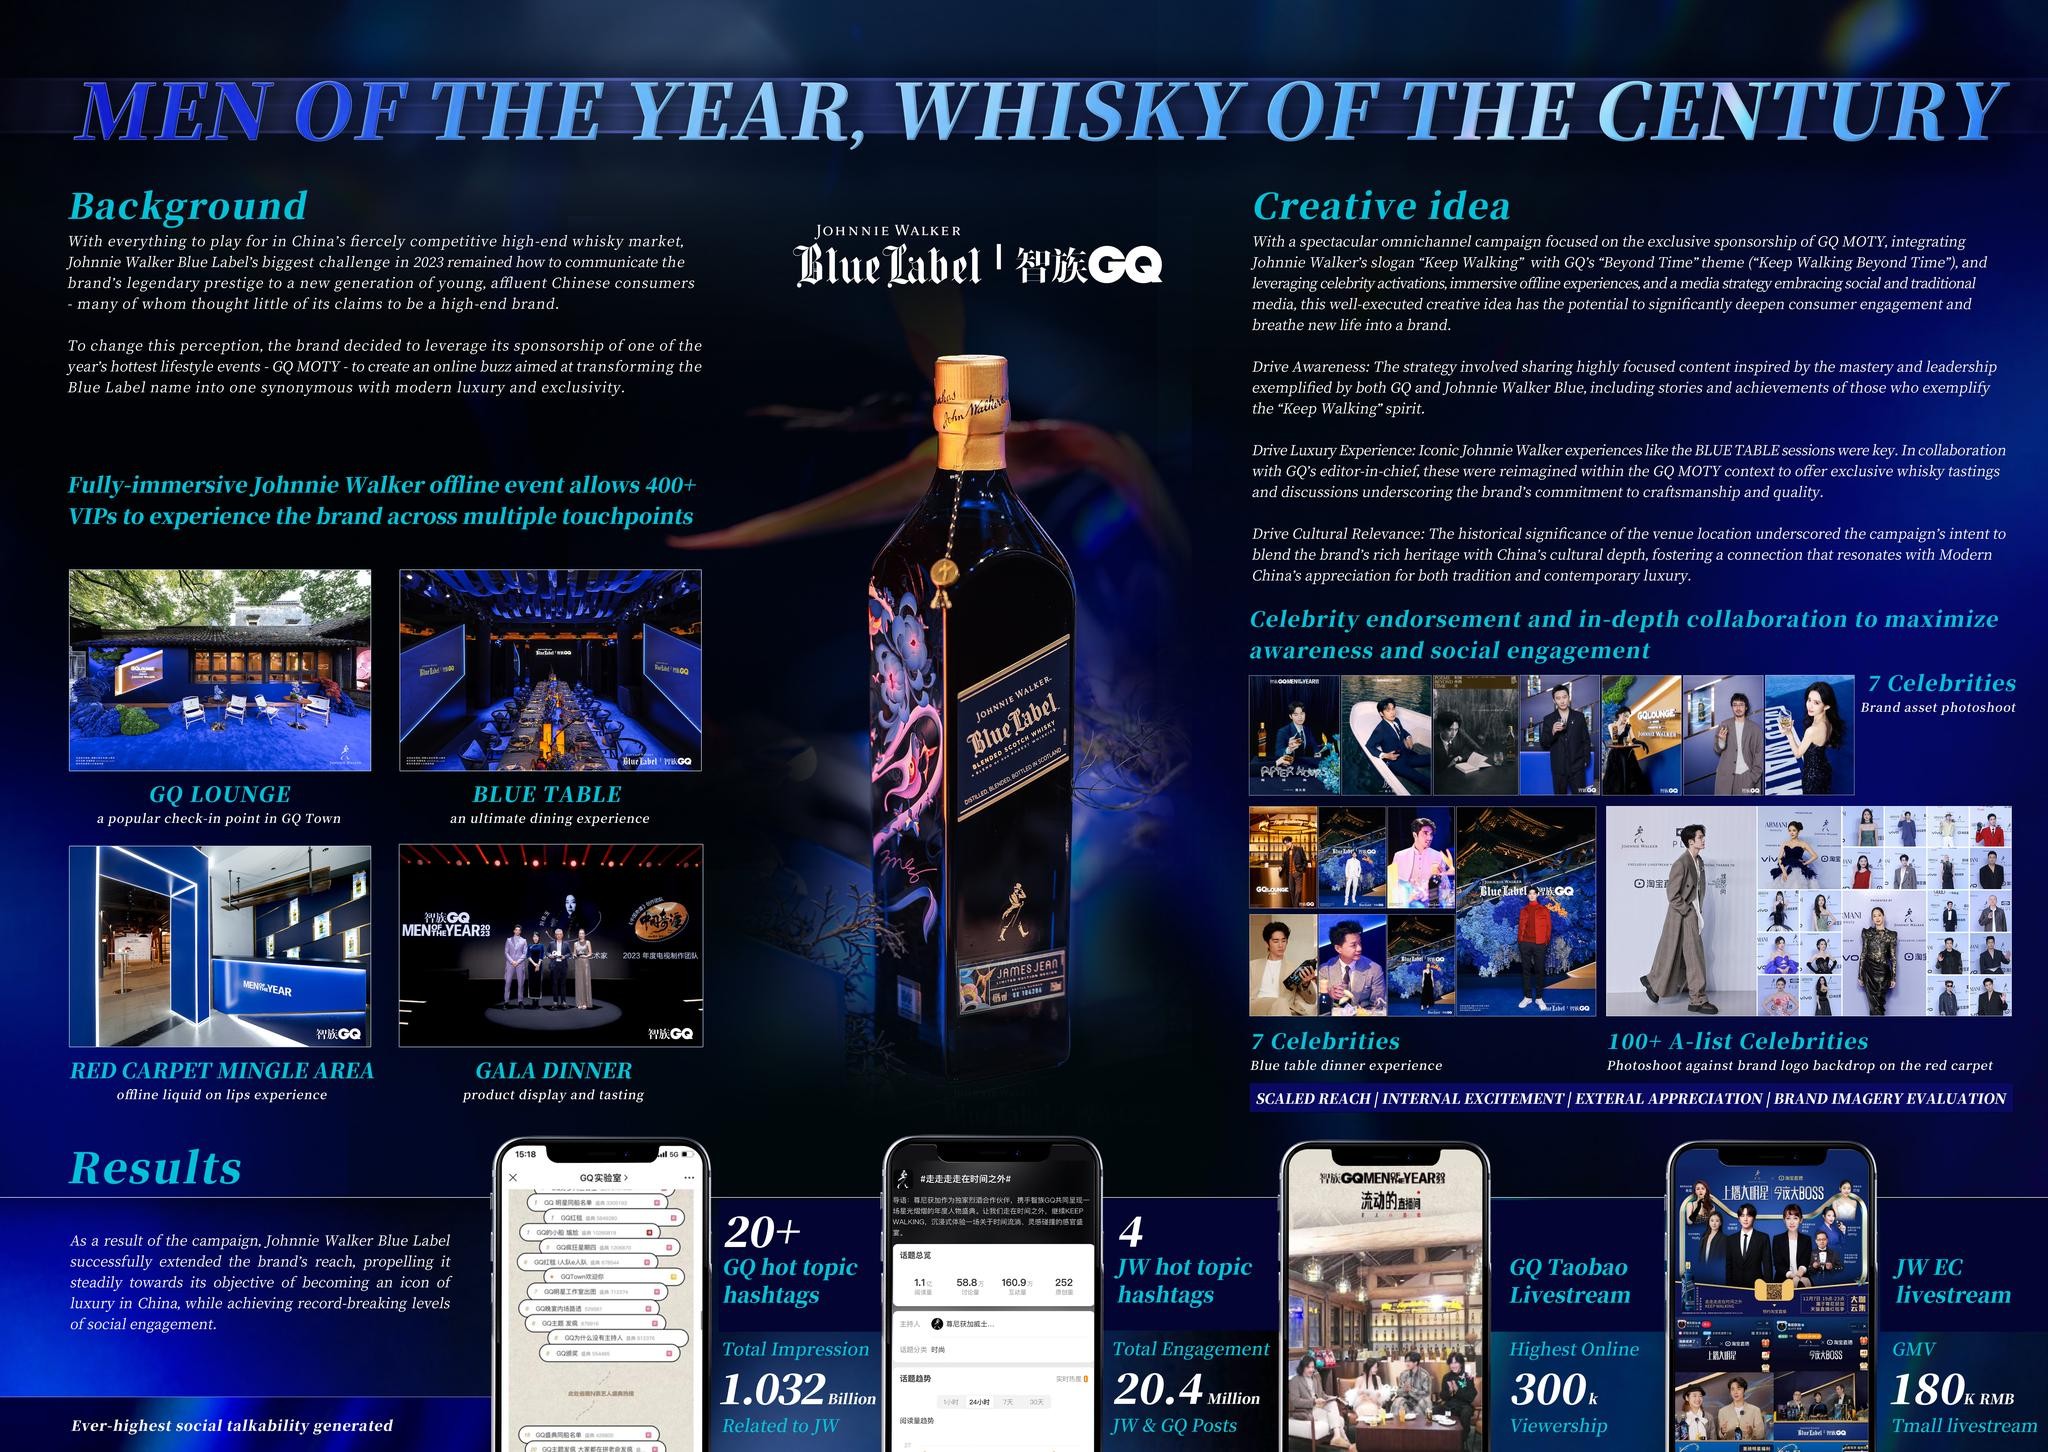 MEN OF THE YEAR, WHISKY OF THE CENTURY